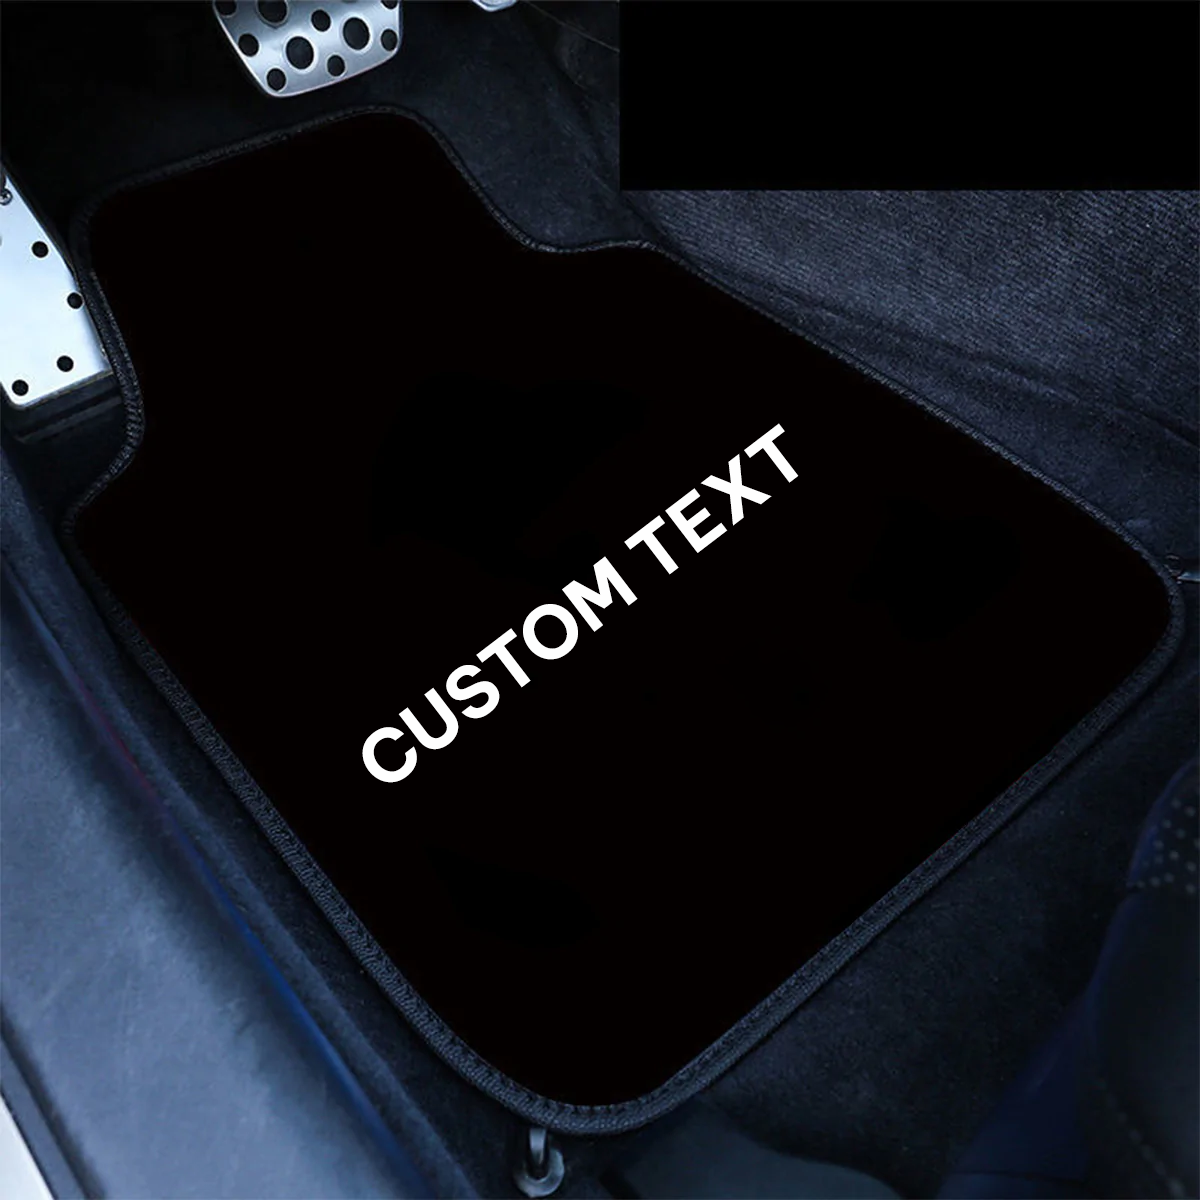 Custom Text For Carpet Floor Mats Set of 4pcs, Compatible with All Cars, Fit Car Floor Mats, All Weather Protection, Universal Type HA13984